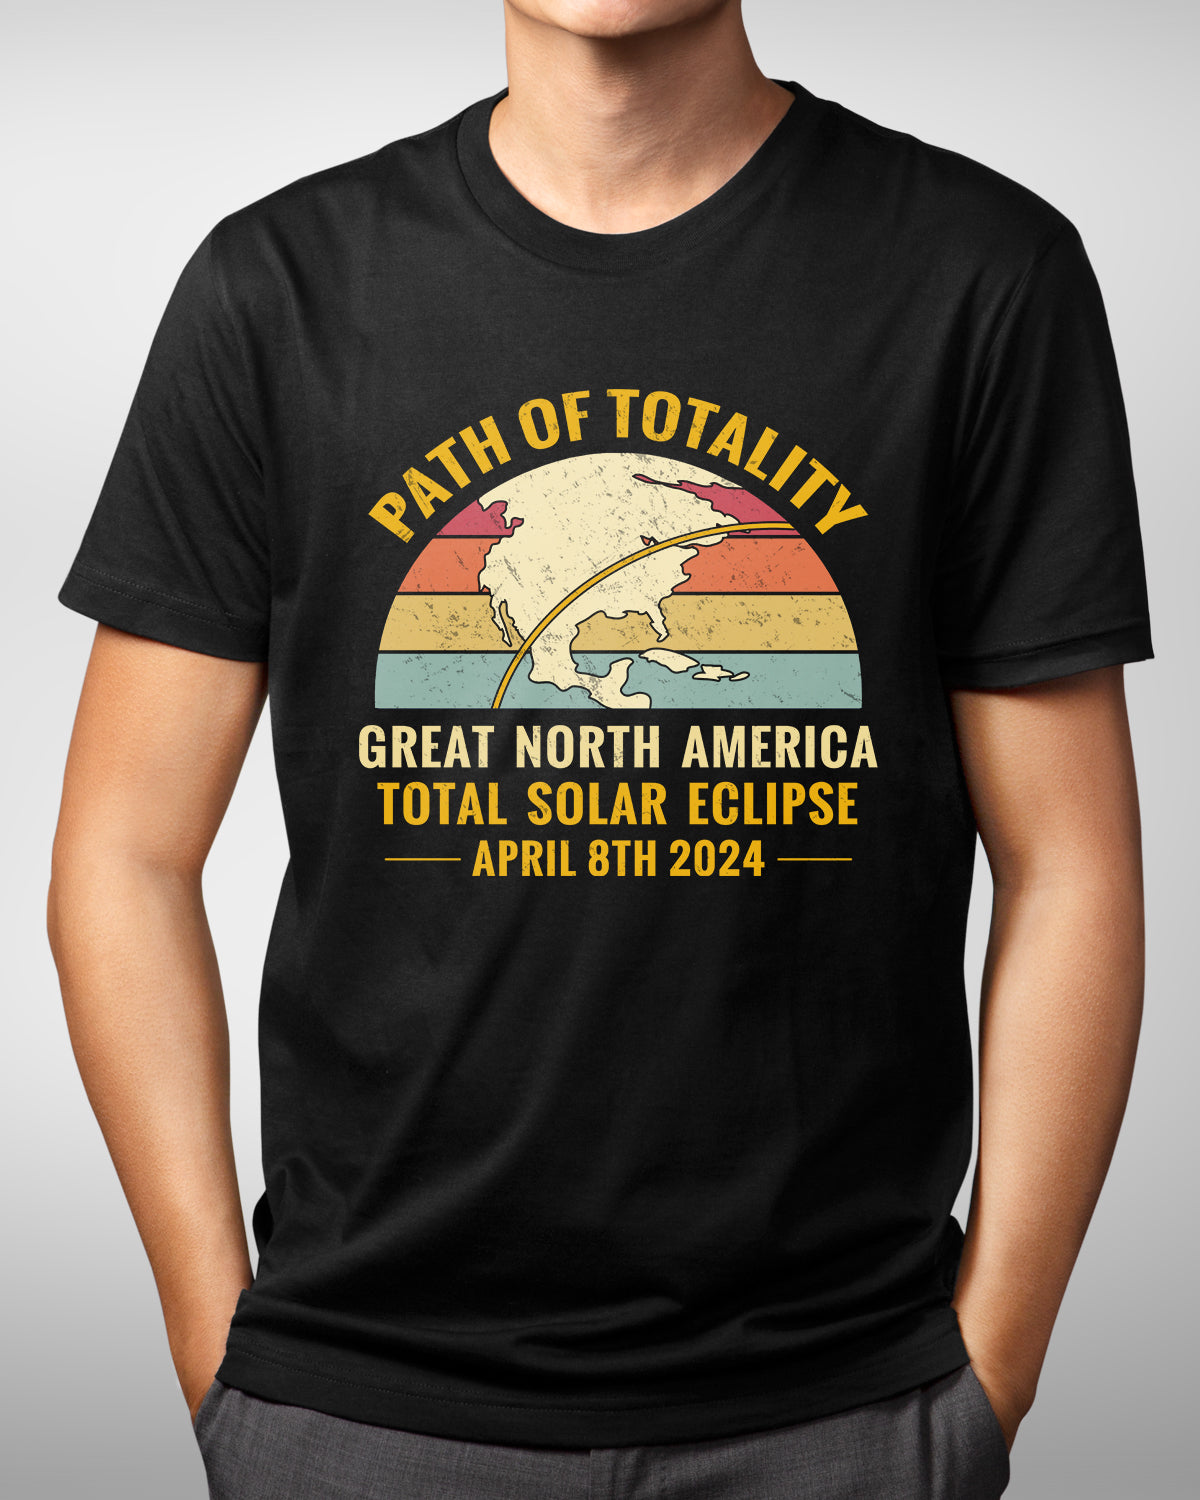 2024 Total Solar Eclipse Shirt, Vintage April 8 Totality Event, Eclipse Souvenir, Family Matching Tees, North America Celestial Event